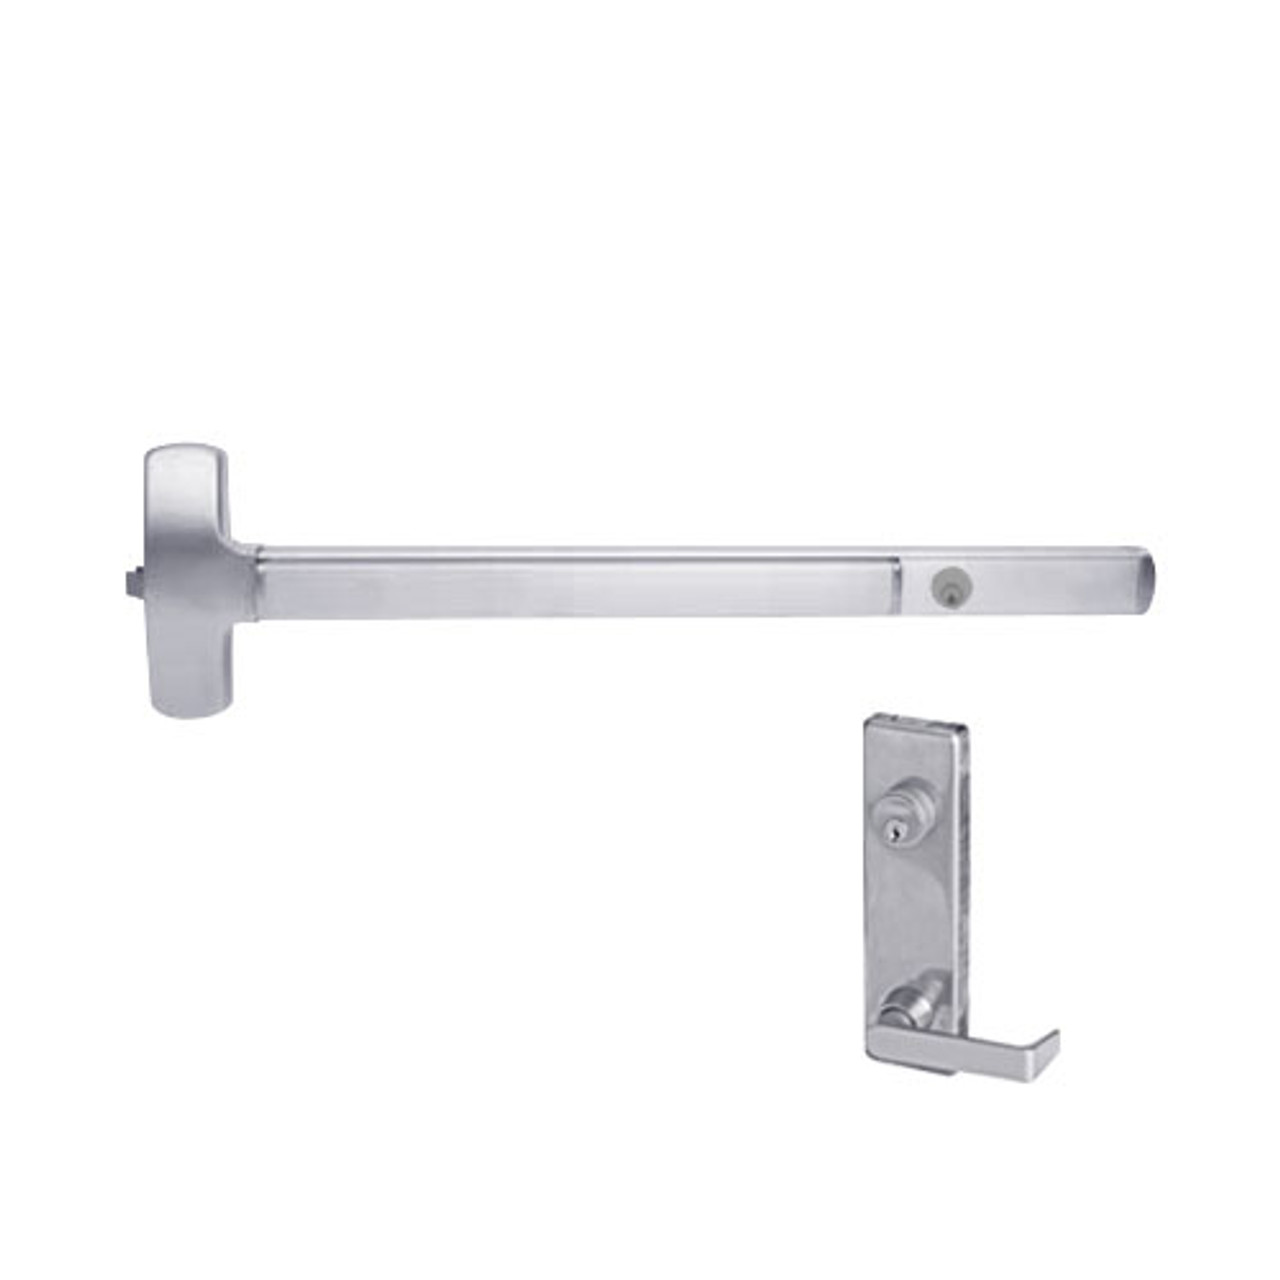 CD25-R-L-DANE-US26-4-LHR Falcon Exit Device in Polished Chrome